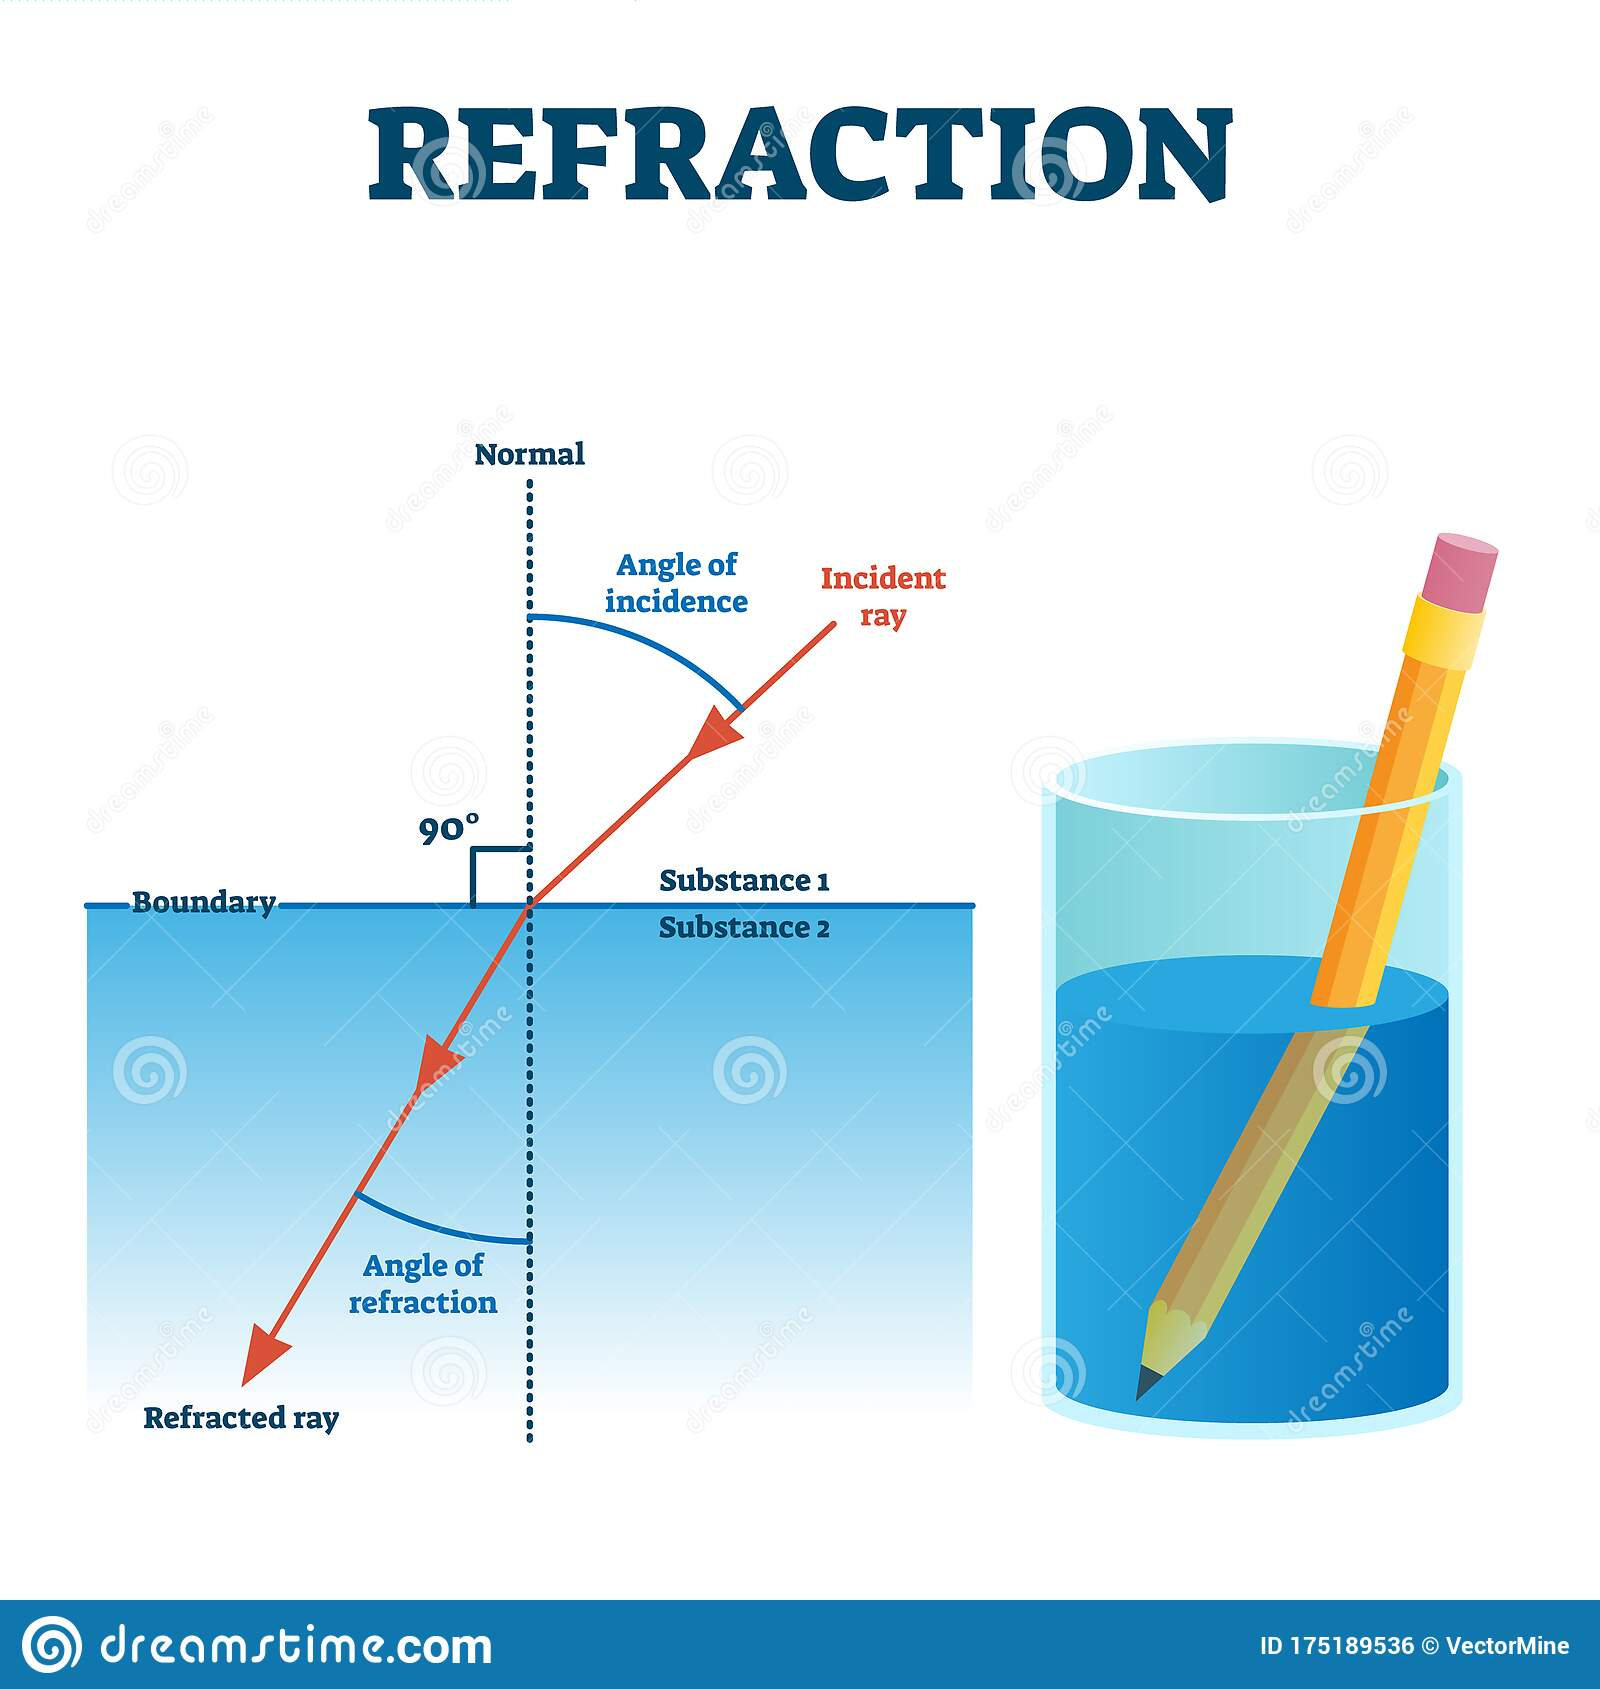 Refraction image